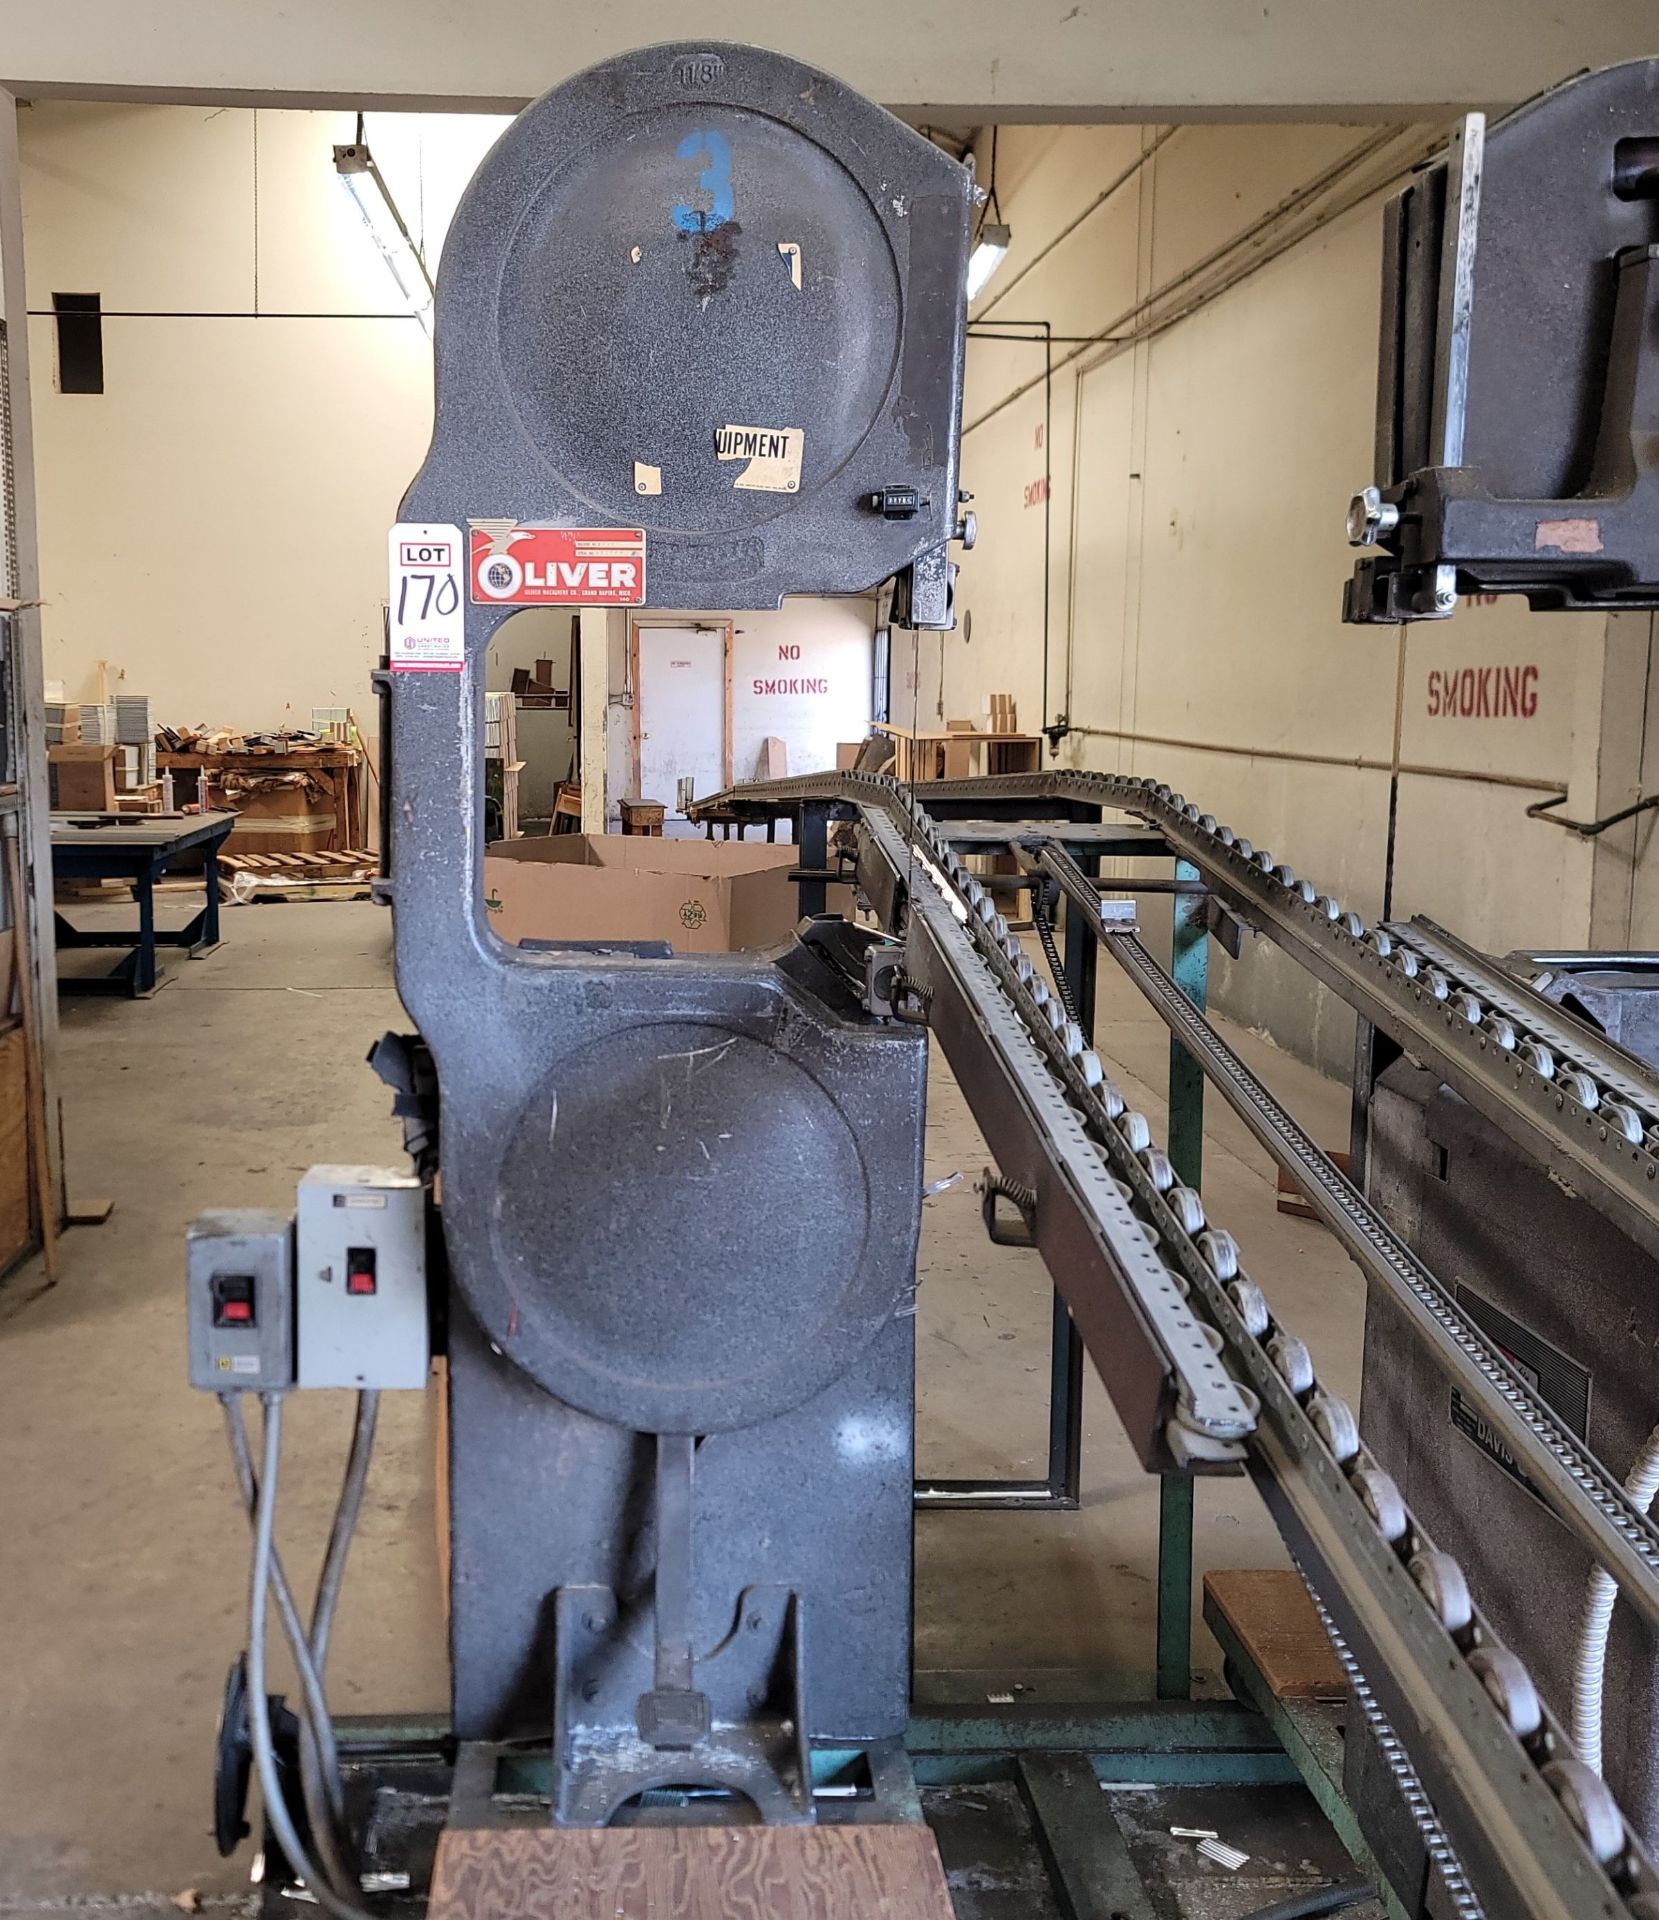 OLIVER MACHINERY VERTICAL BANDSAW, NO. 2520, 19-1/2" THROAT, S/N 250002